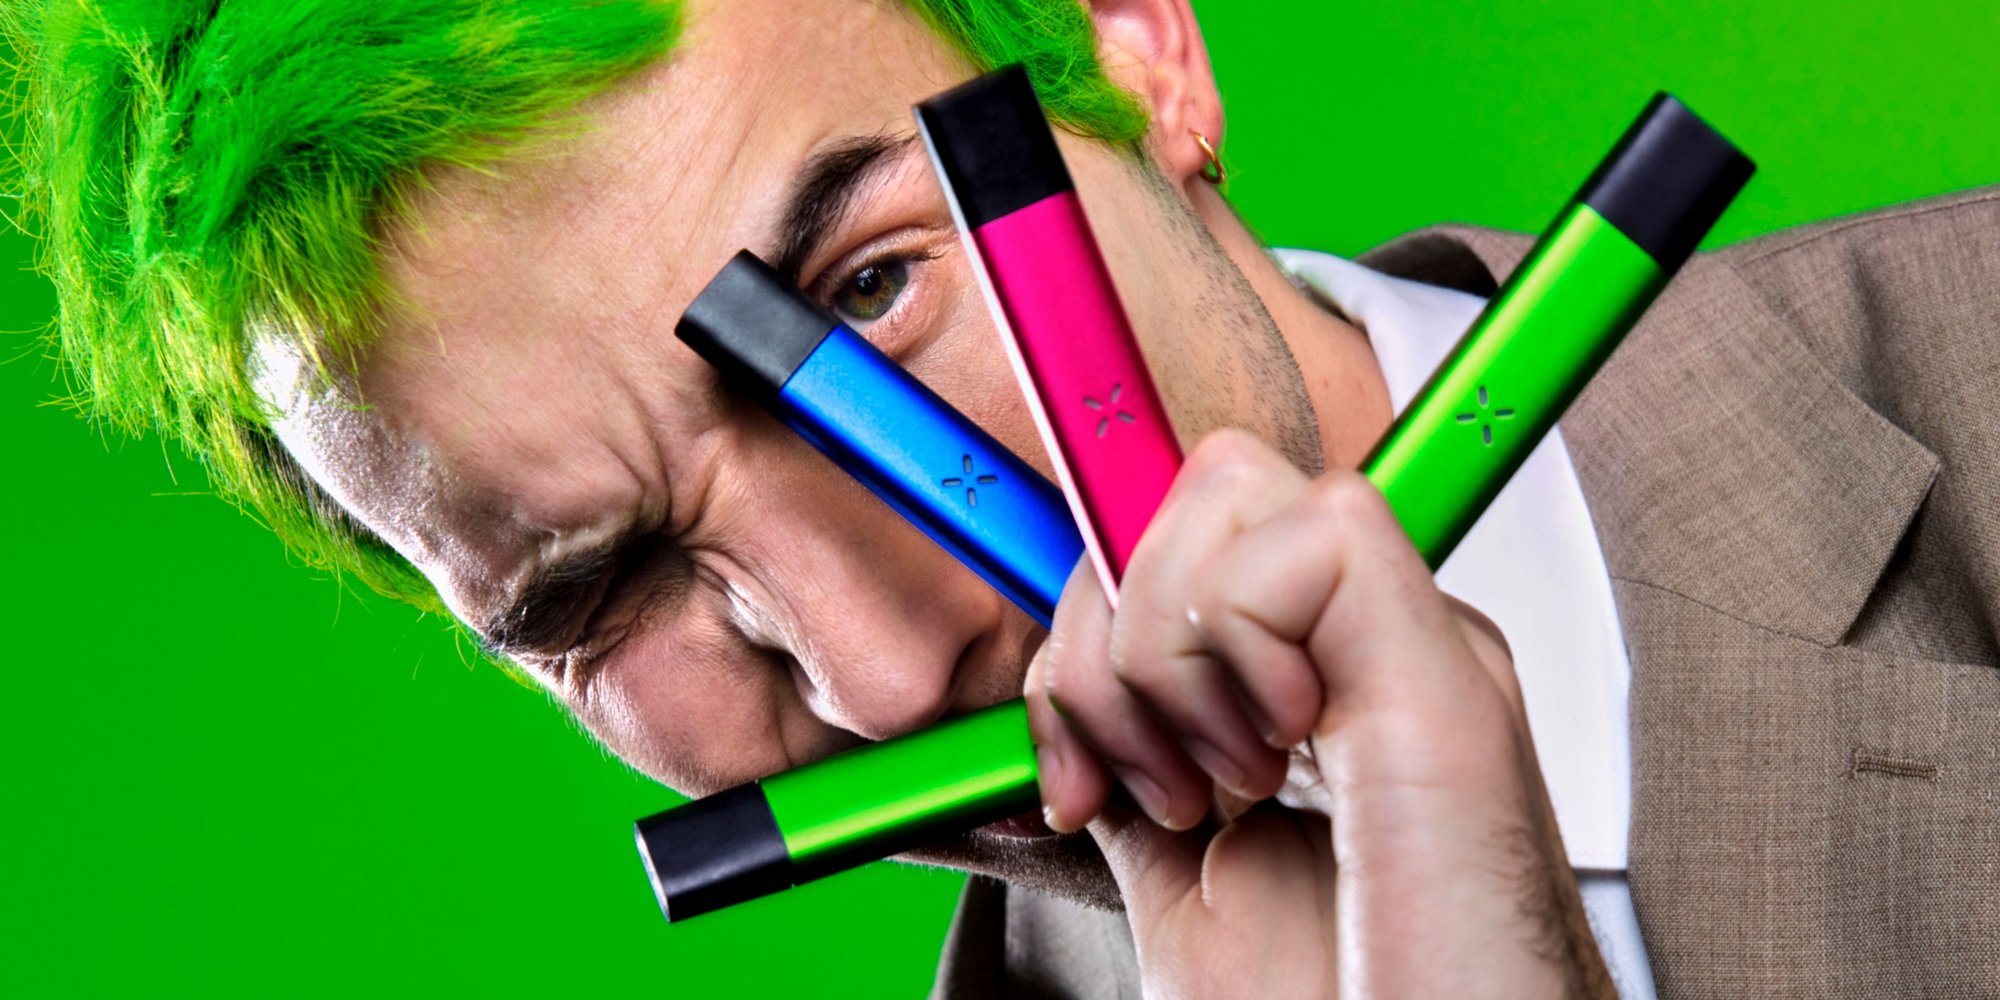 Guy with green hair holding four Pax Era vape pens between his fingers